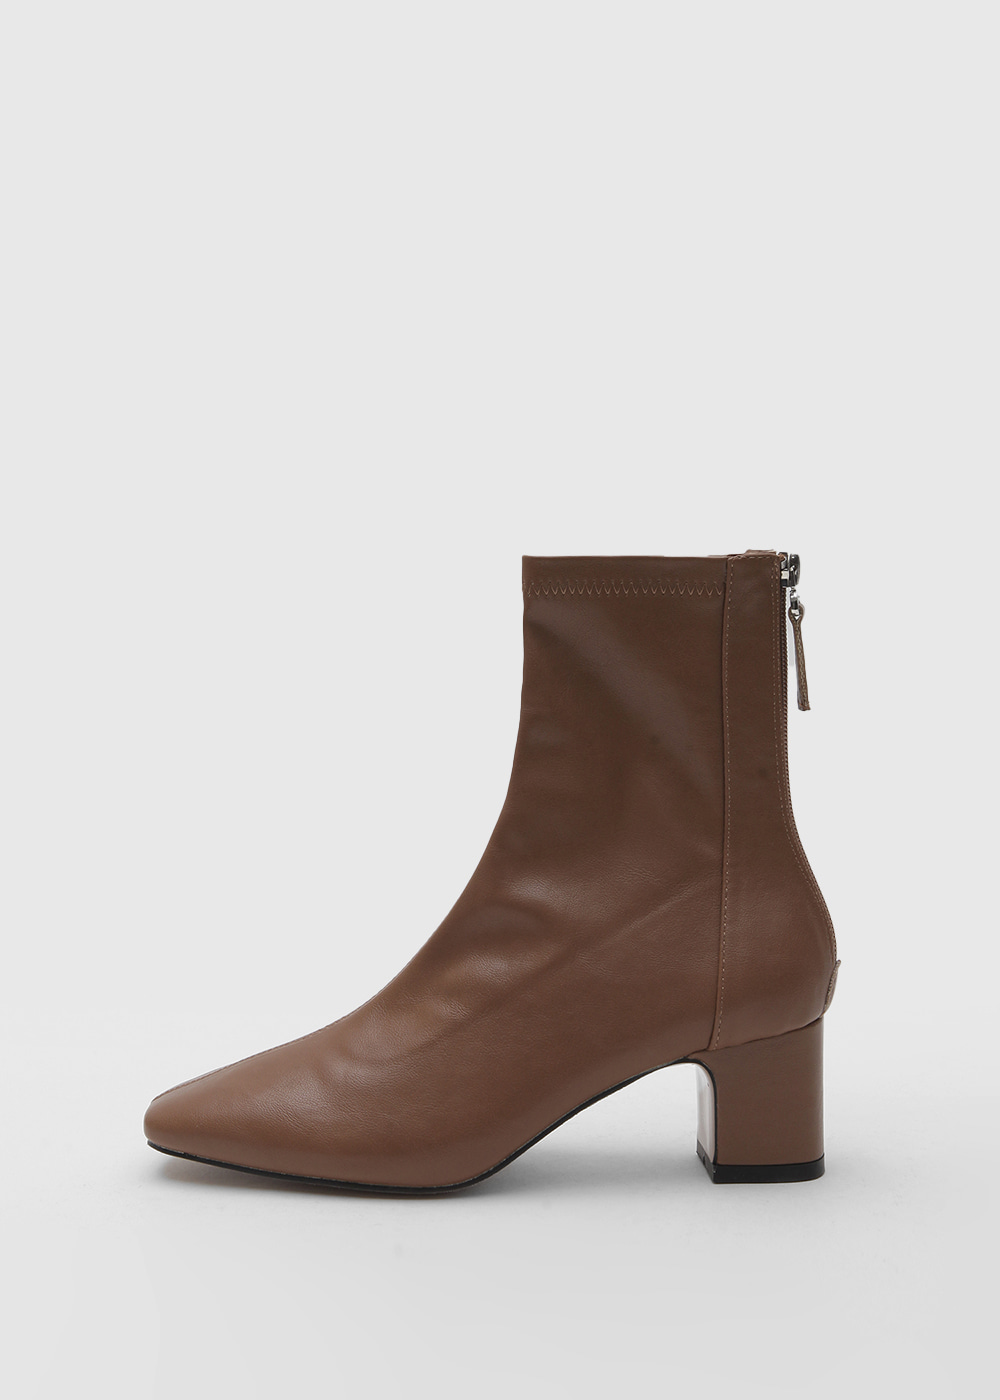 FW Daily Socks Ankle Boots